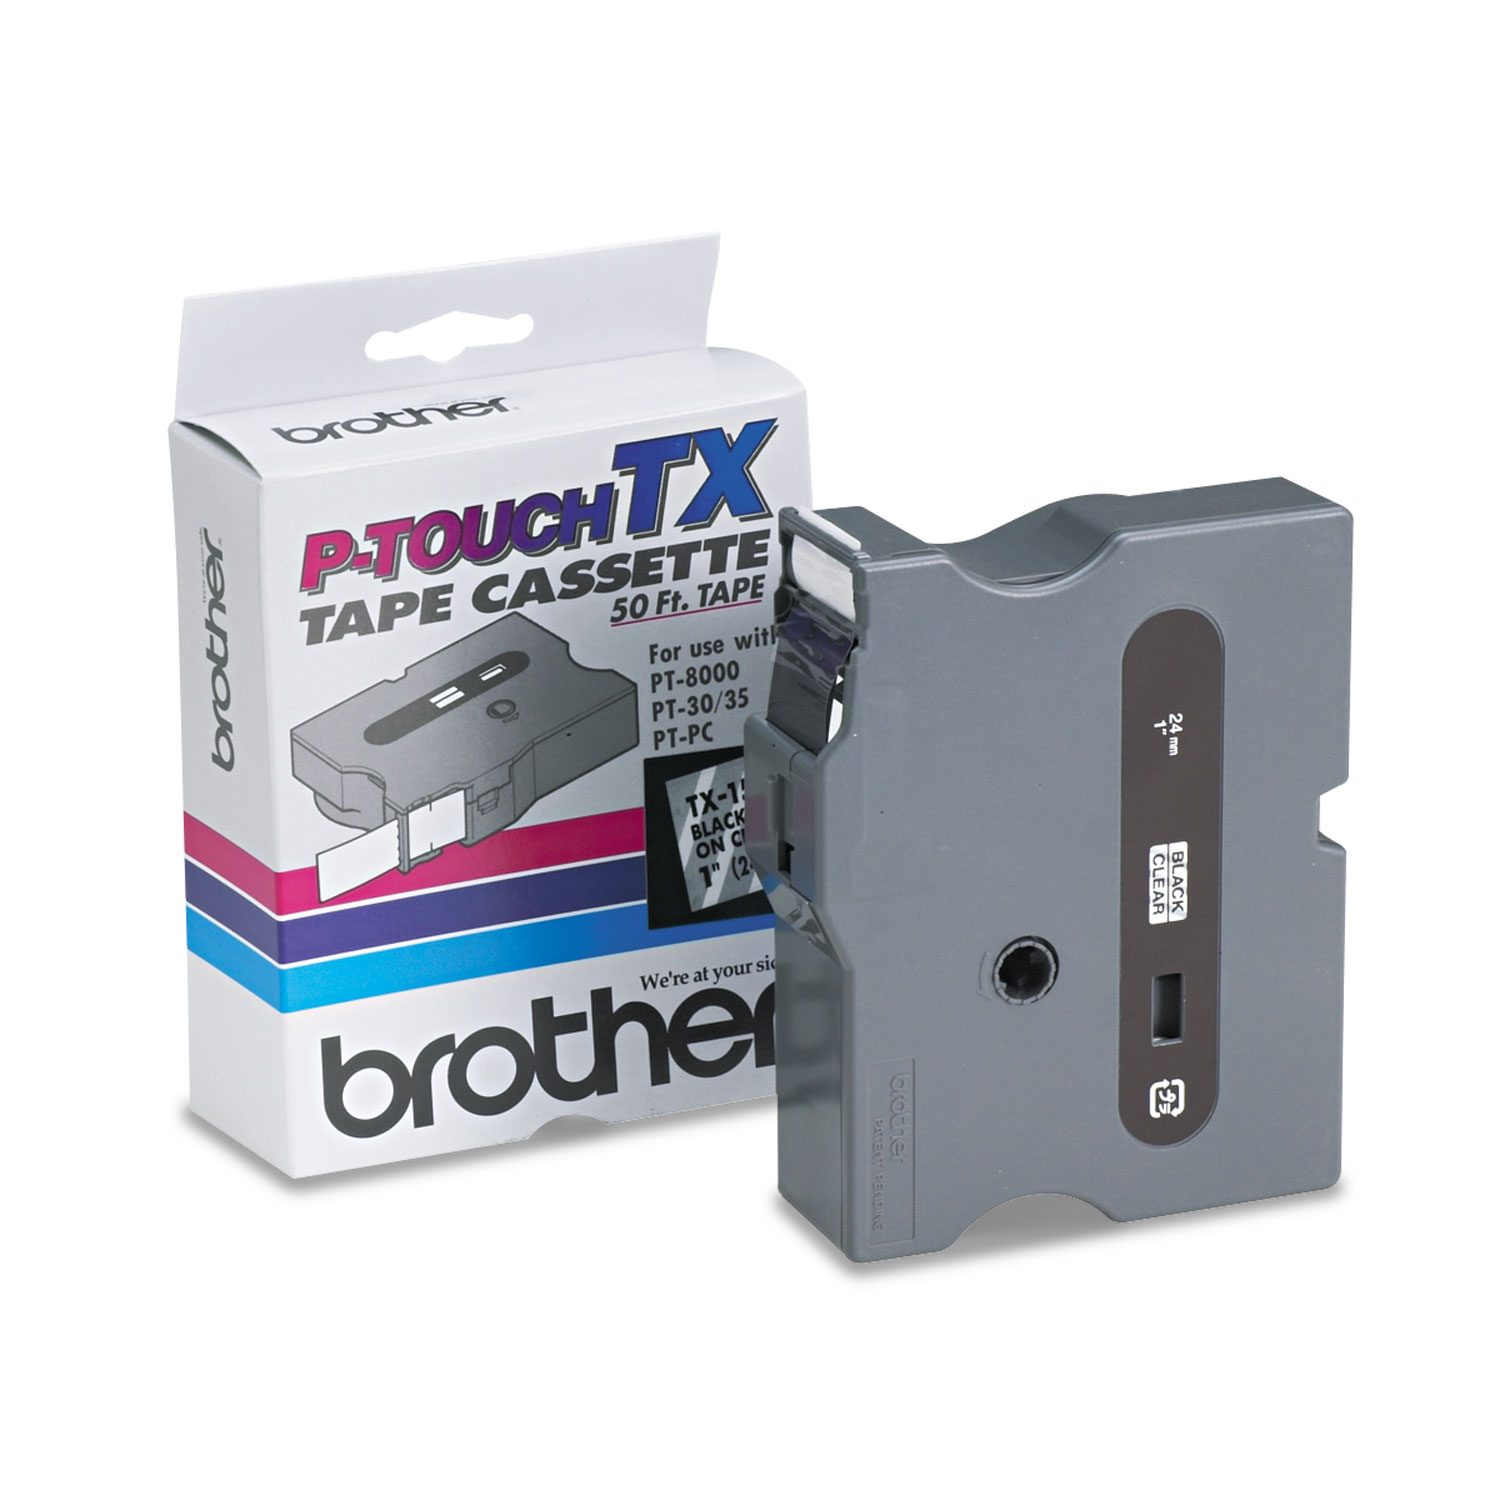  Brother P-Touch TX1511 TX Tape Cartridge for PT-8000, PT-PC, PT-30/35, 1 x 50 ft, Black on Clear (BRTTX1511) 